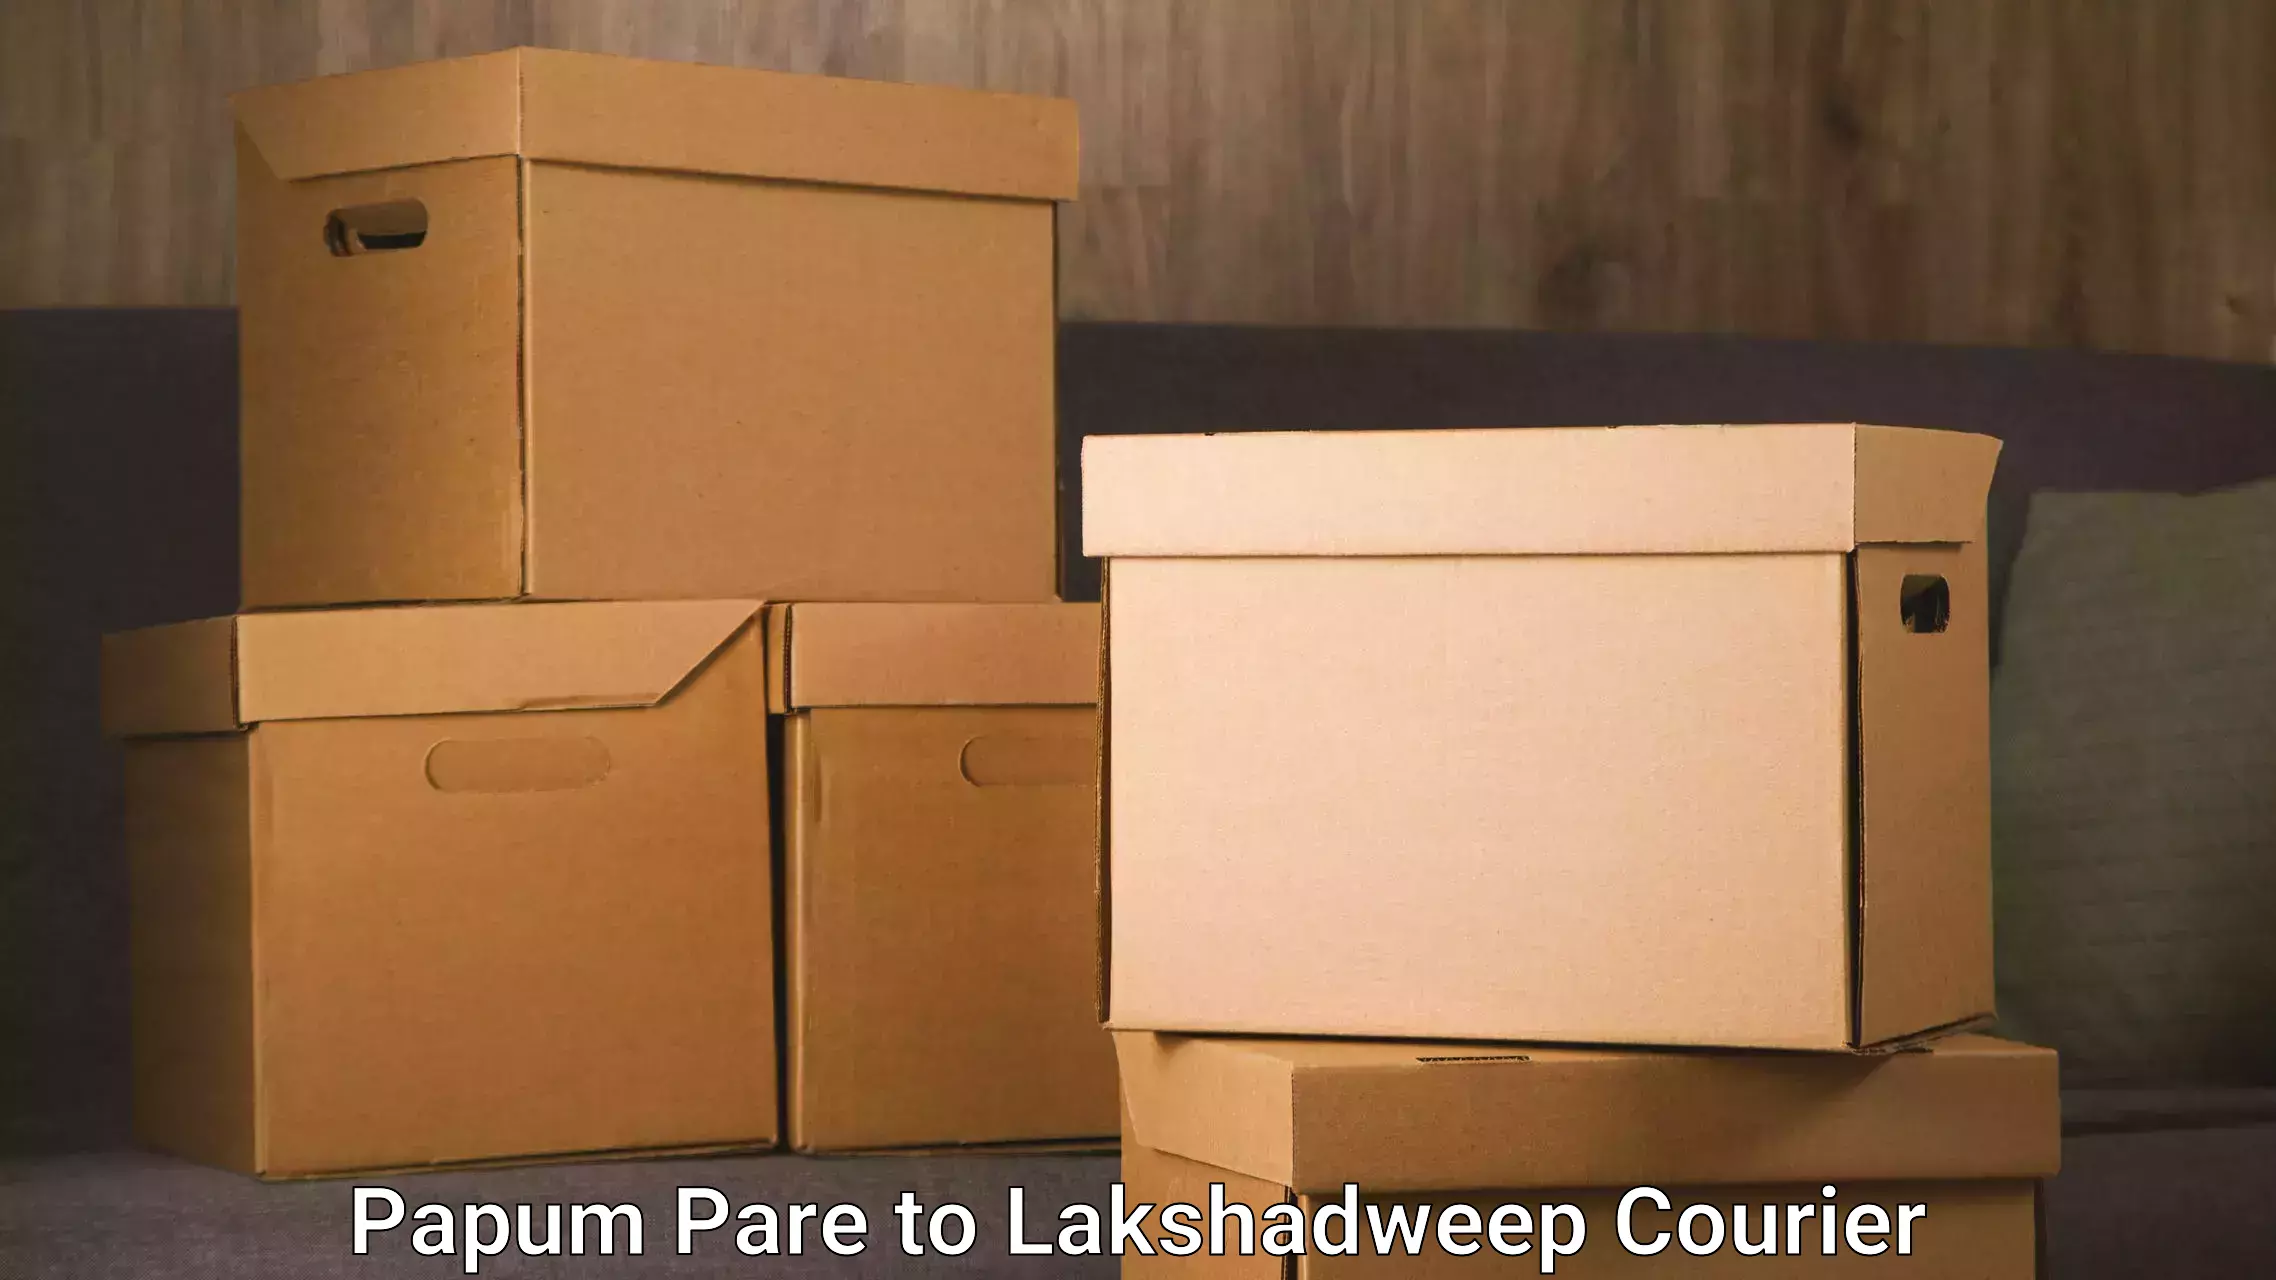 Professional courier services Papum Pare to Lakshadweep